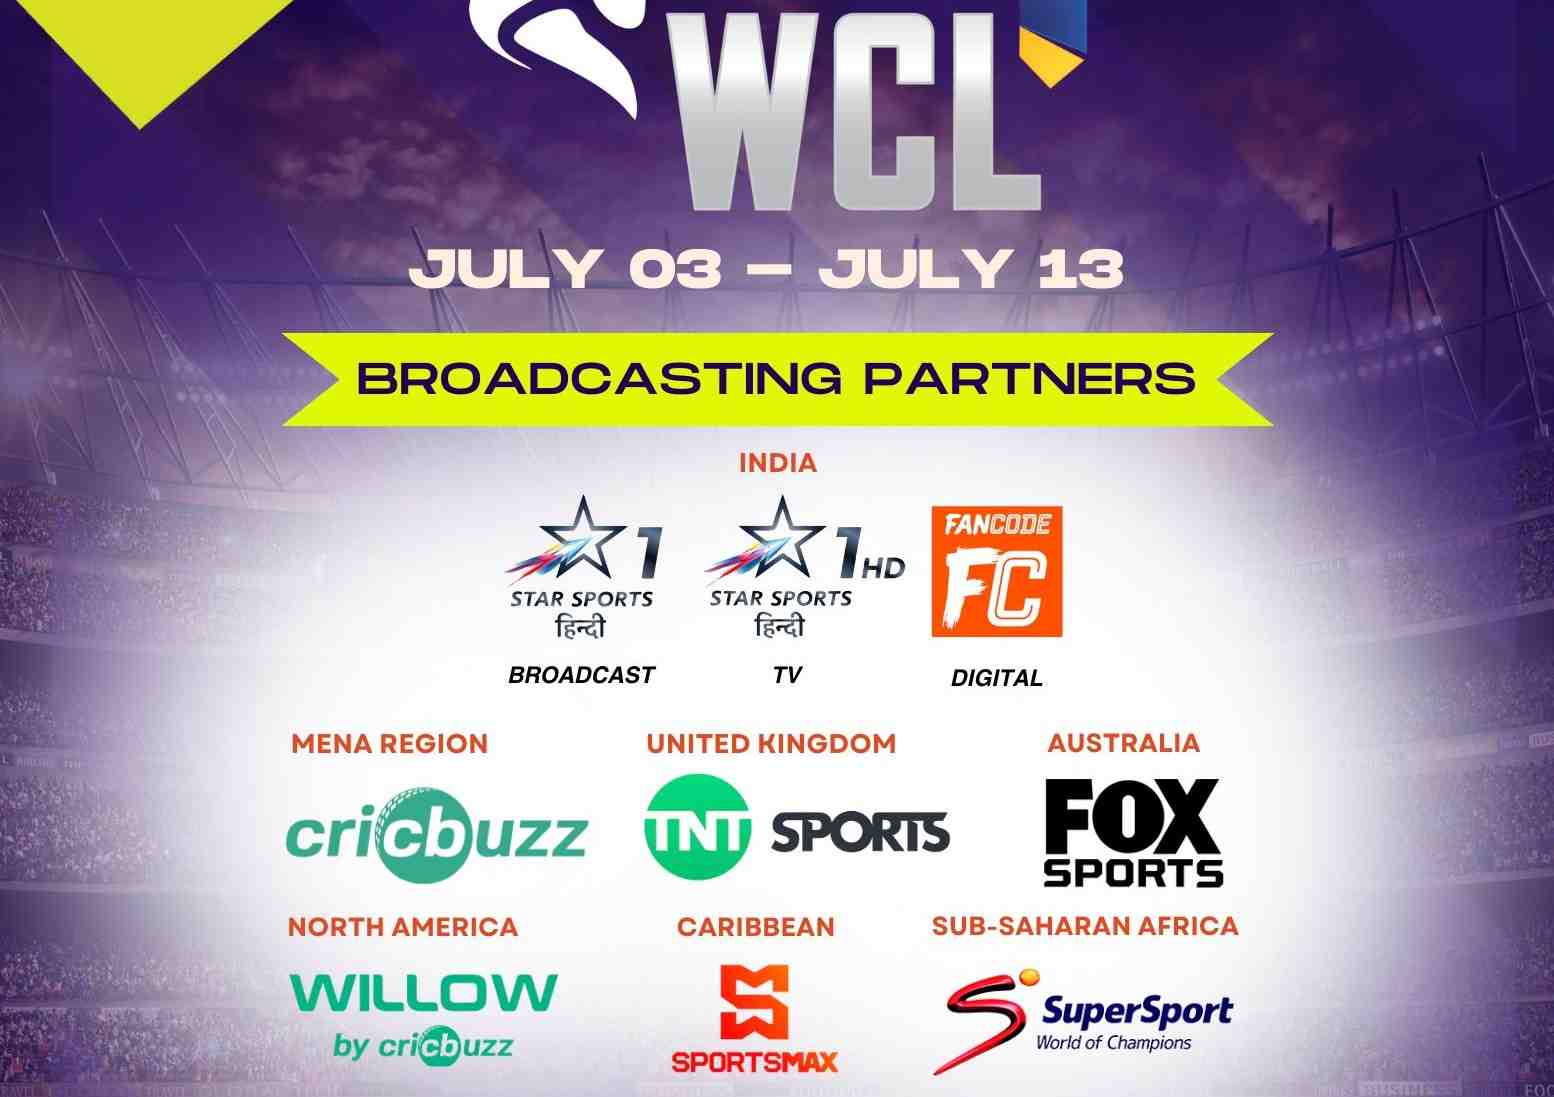 WCL Goes Super Big in Broadcasting in India